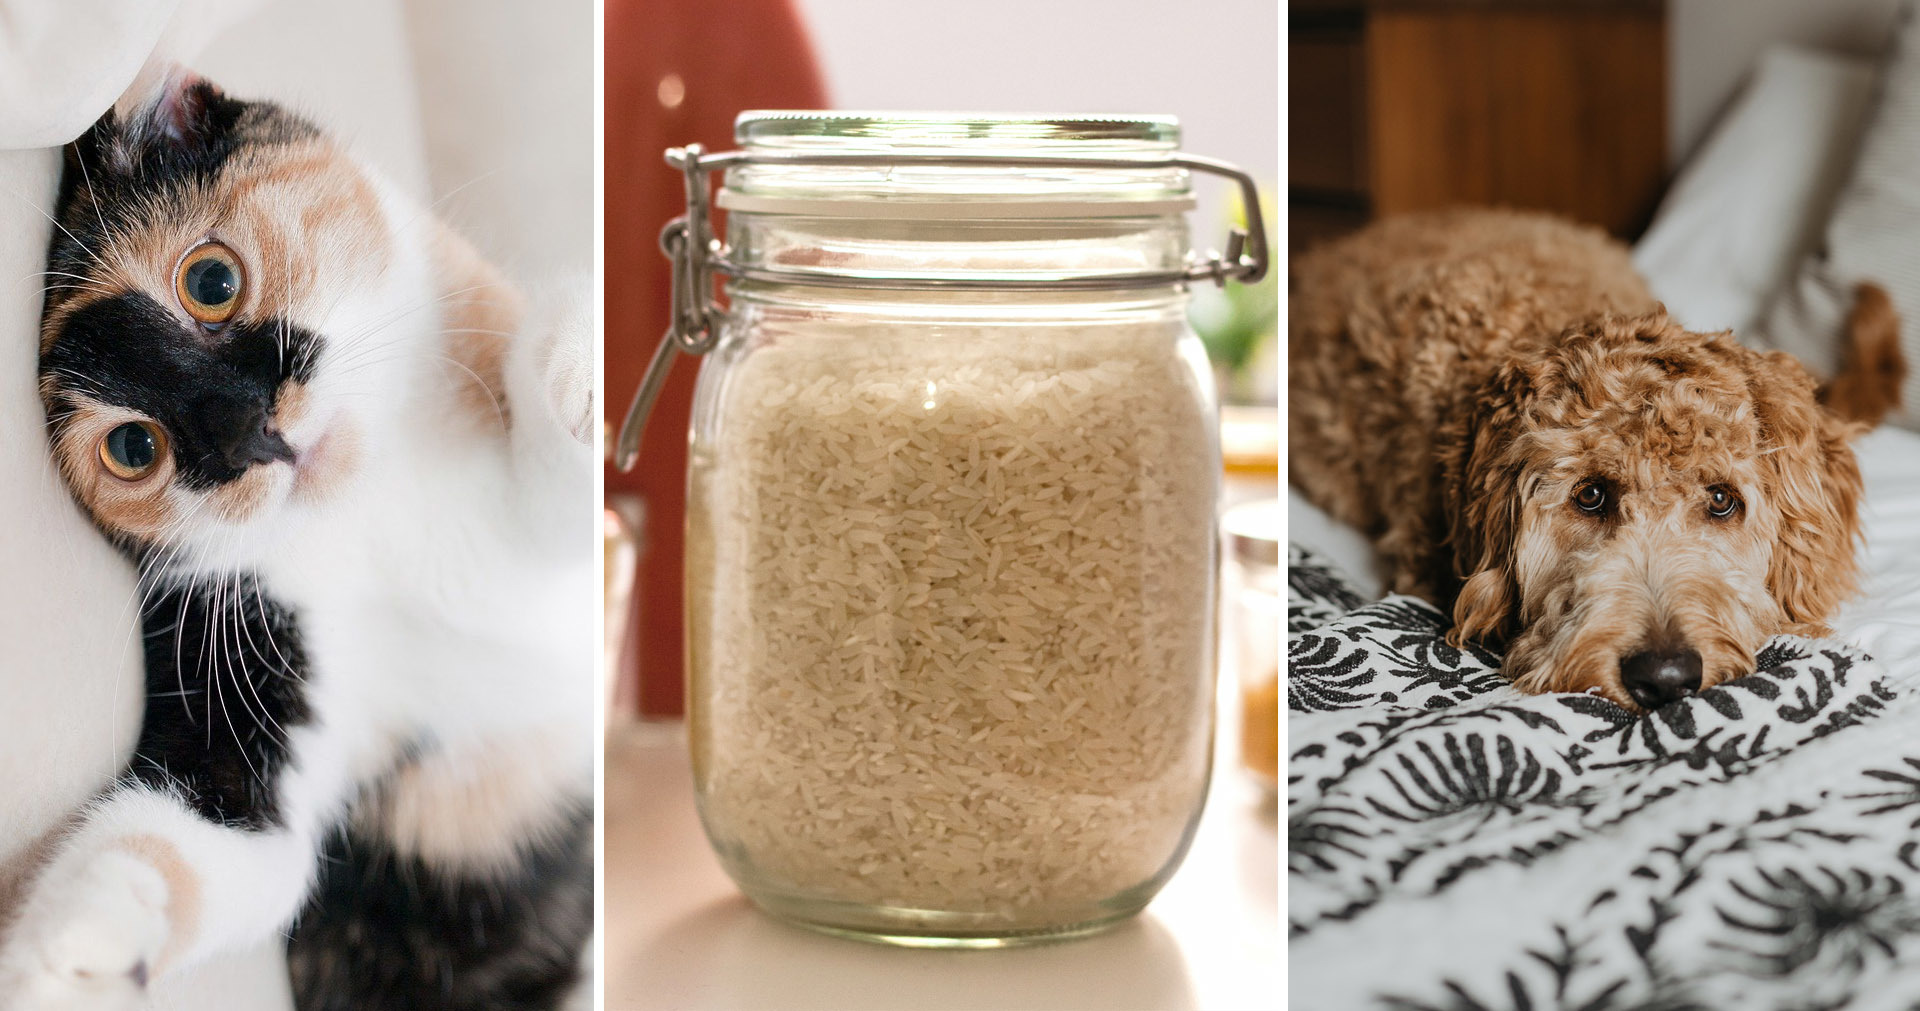 Dog, cat and rice. Bland gastrointestinal diets in dogs and cats.